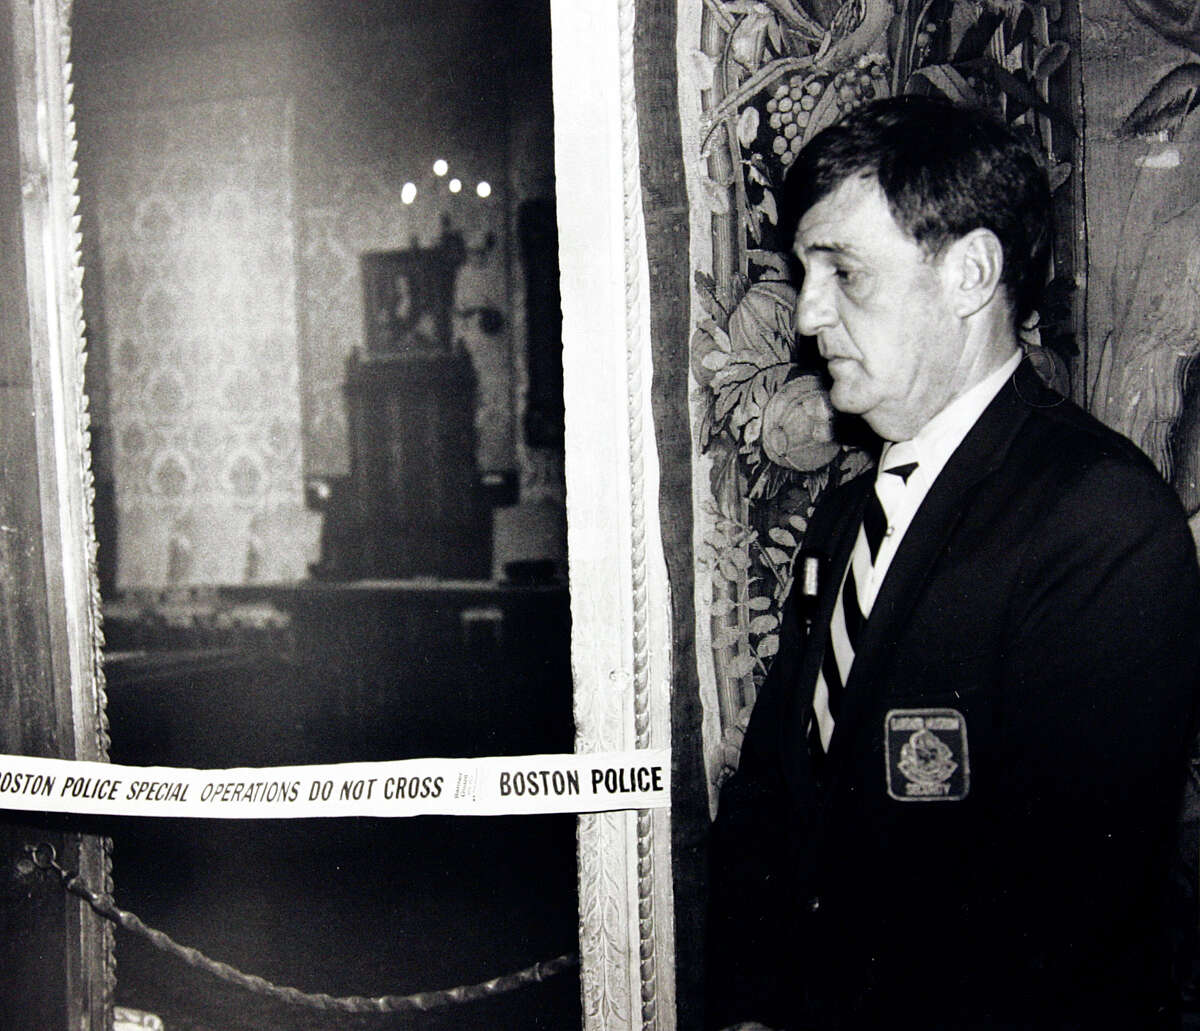 In this March 21, 1990 file photo, a security guard stands outside the Dutch Room of the Isabella Stewart Gardner Museum, where robbers stole more than a dozen works of art in an early morning robbery in Boston. It remains the most tantalizing art heist mystery in the world. In the early hours of March 18, 1990, two thieves walked into Boston's elegant Isabella Stewart Gardner Museum disguised as police officers and bound and gagged two guards using handcuffs and duct tape. For the next 81 minutes, they sauntered around the ornate galleries, removing masterworks including those by Rembrandt, Vermeer, Degas and Manet, cutting some of the largest pieces from their frames. Now, 20 years later, investigators are making a renewed push to recover the paintings.